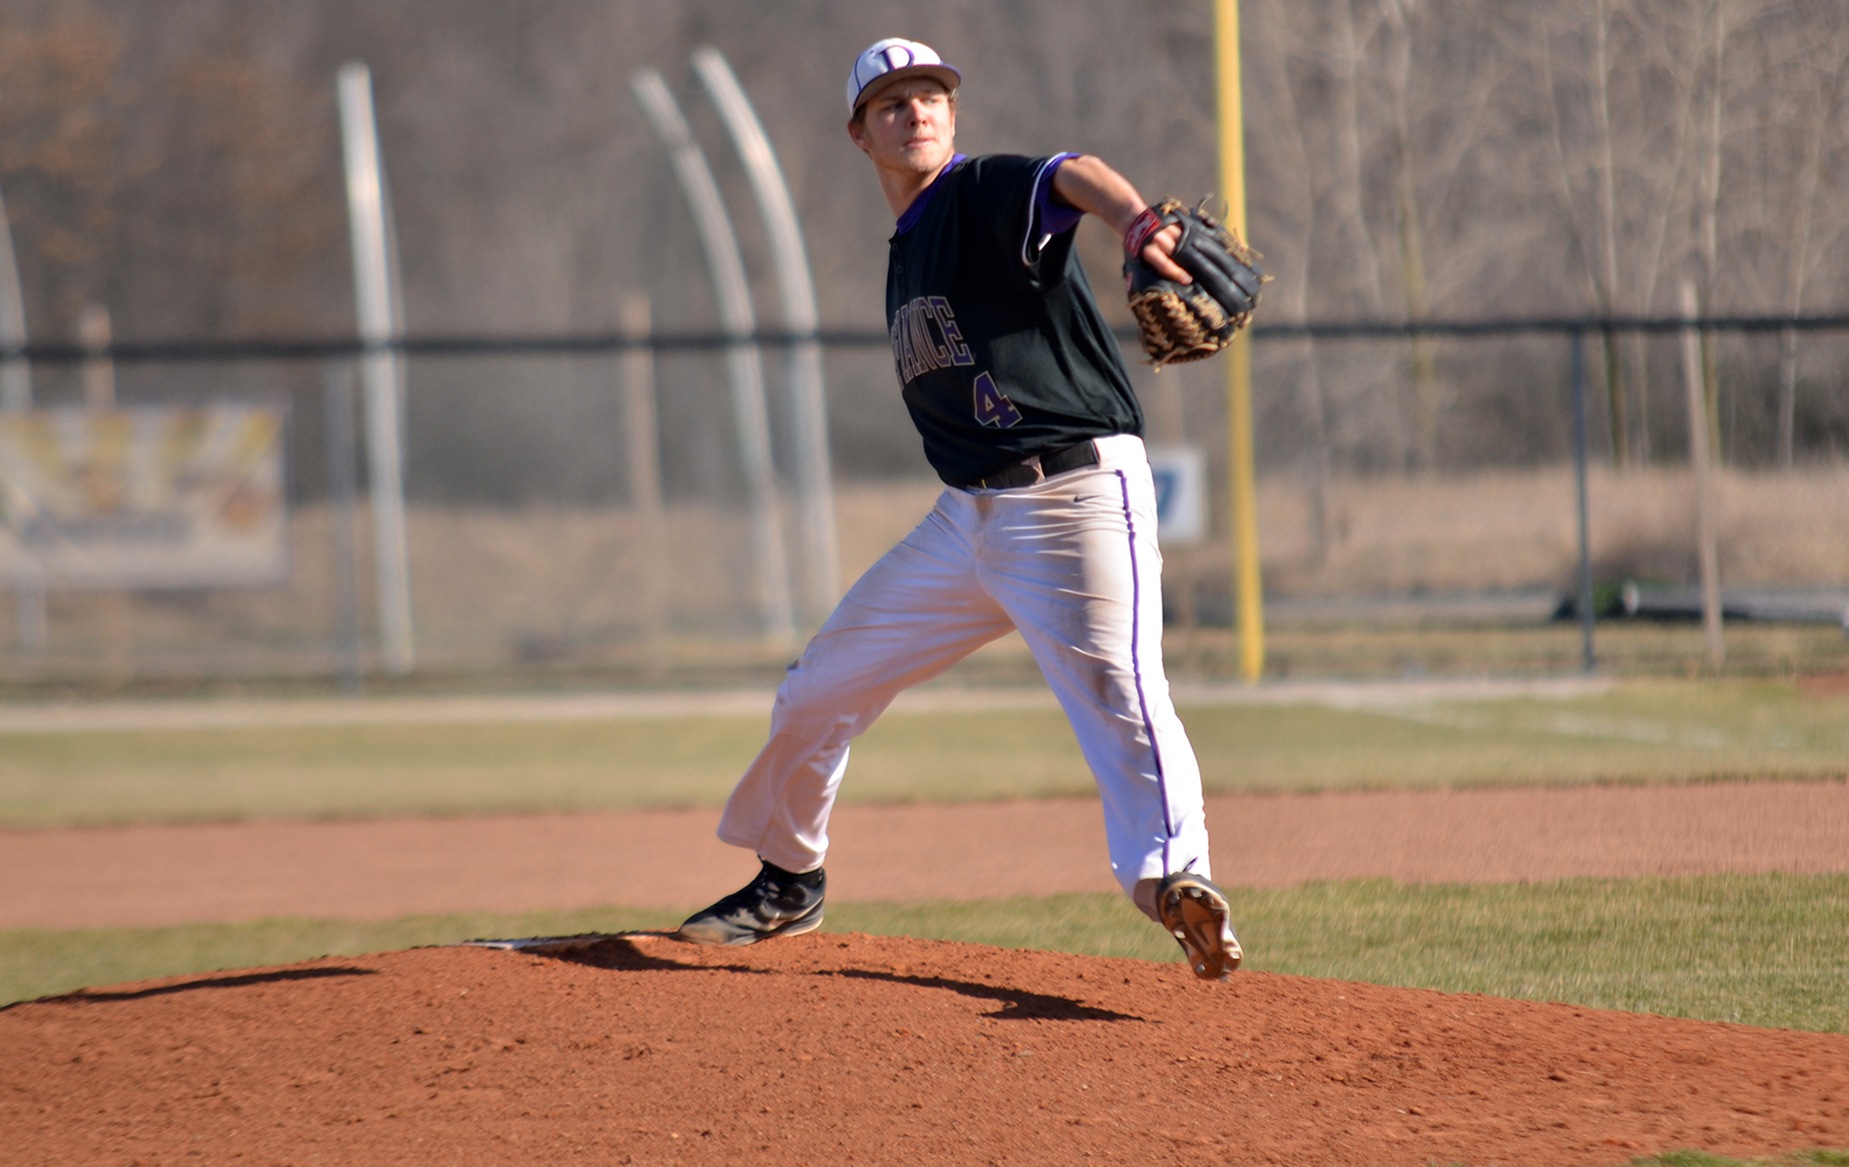 DC Pitching Powers Jackets to Fourth in HCAC Standings